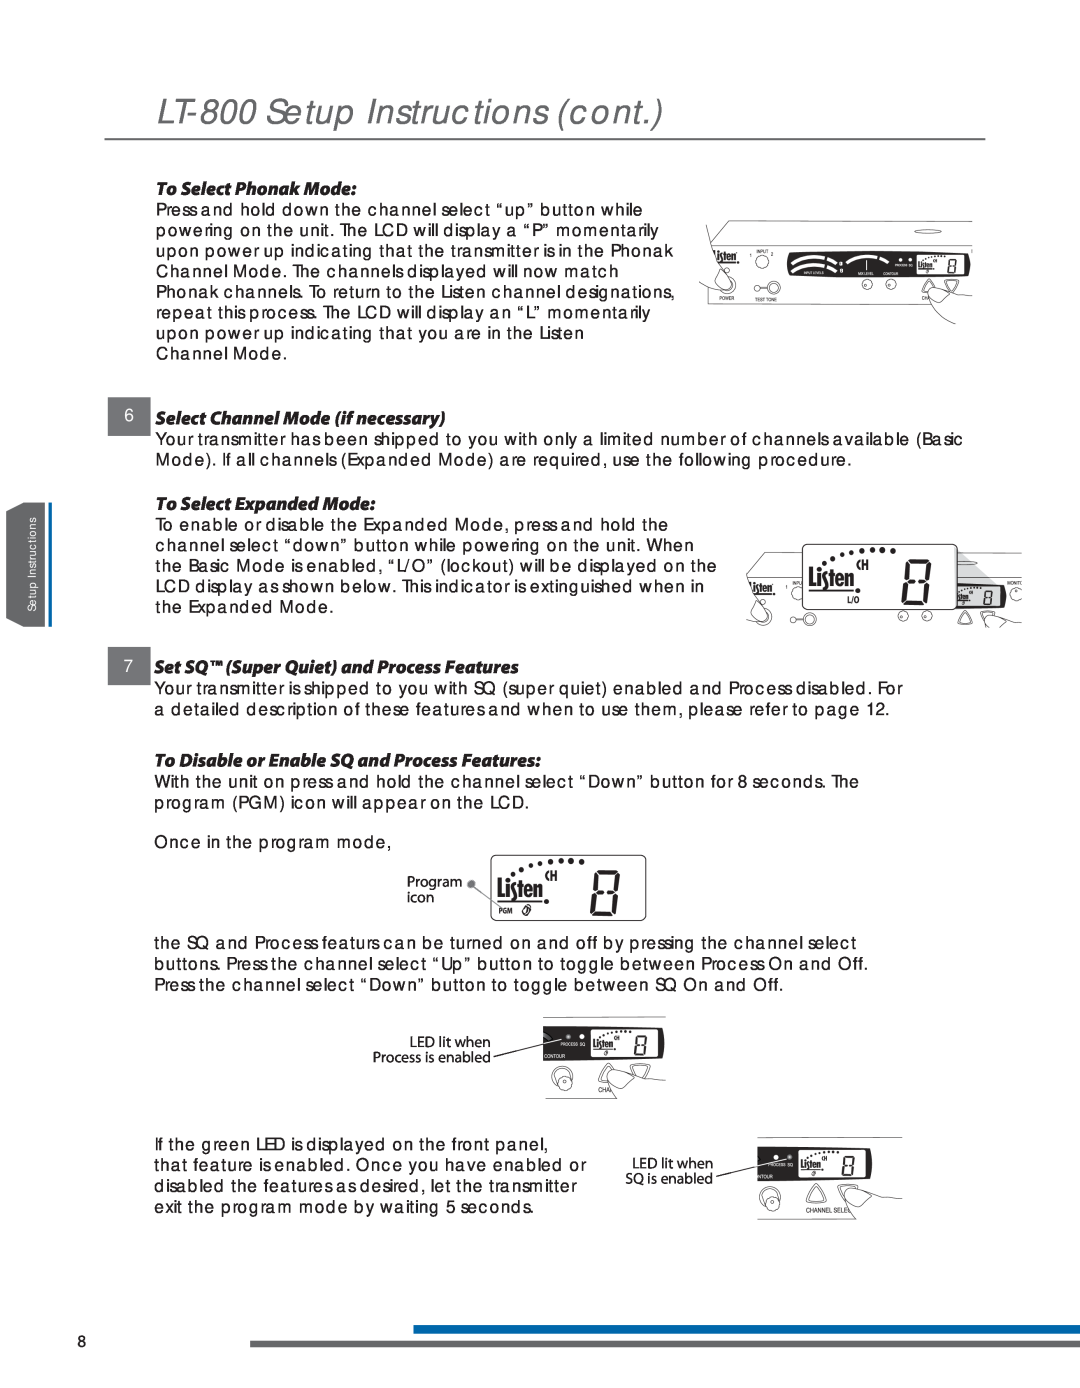 Listen Technologies LT-800-216 LT-800Setup Instructions cont, To Select Phonak Mode, 6Select Channel Mode if necessary 